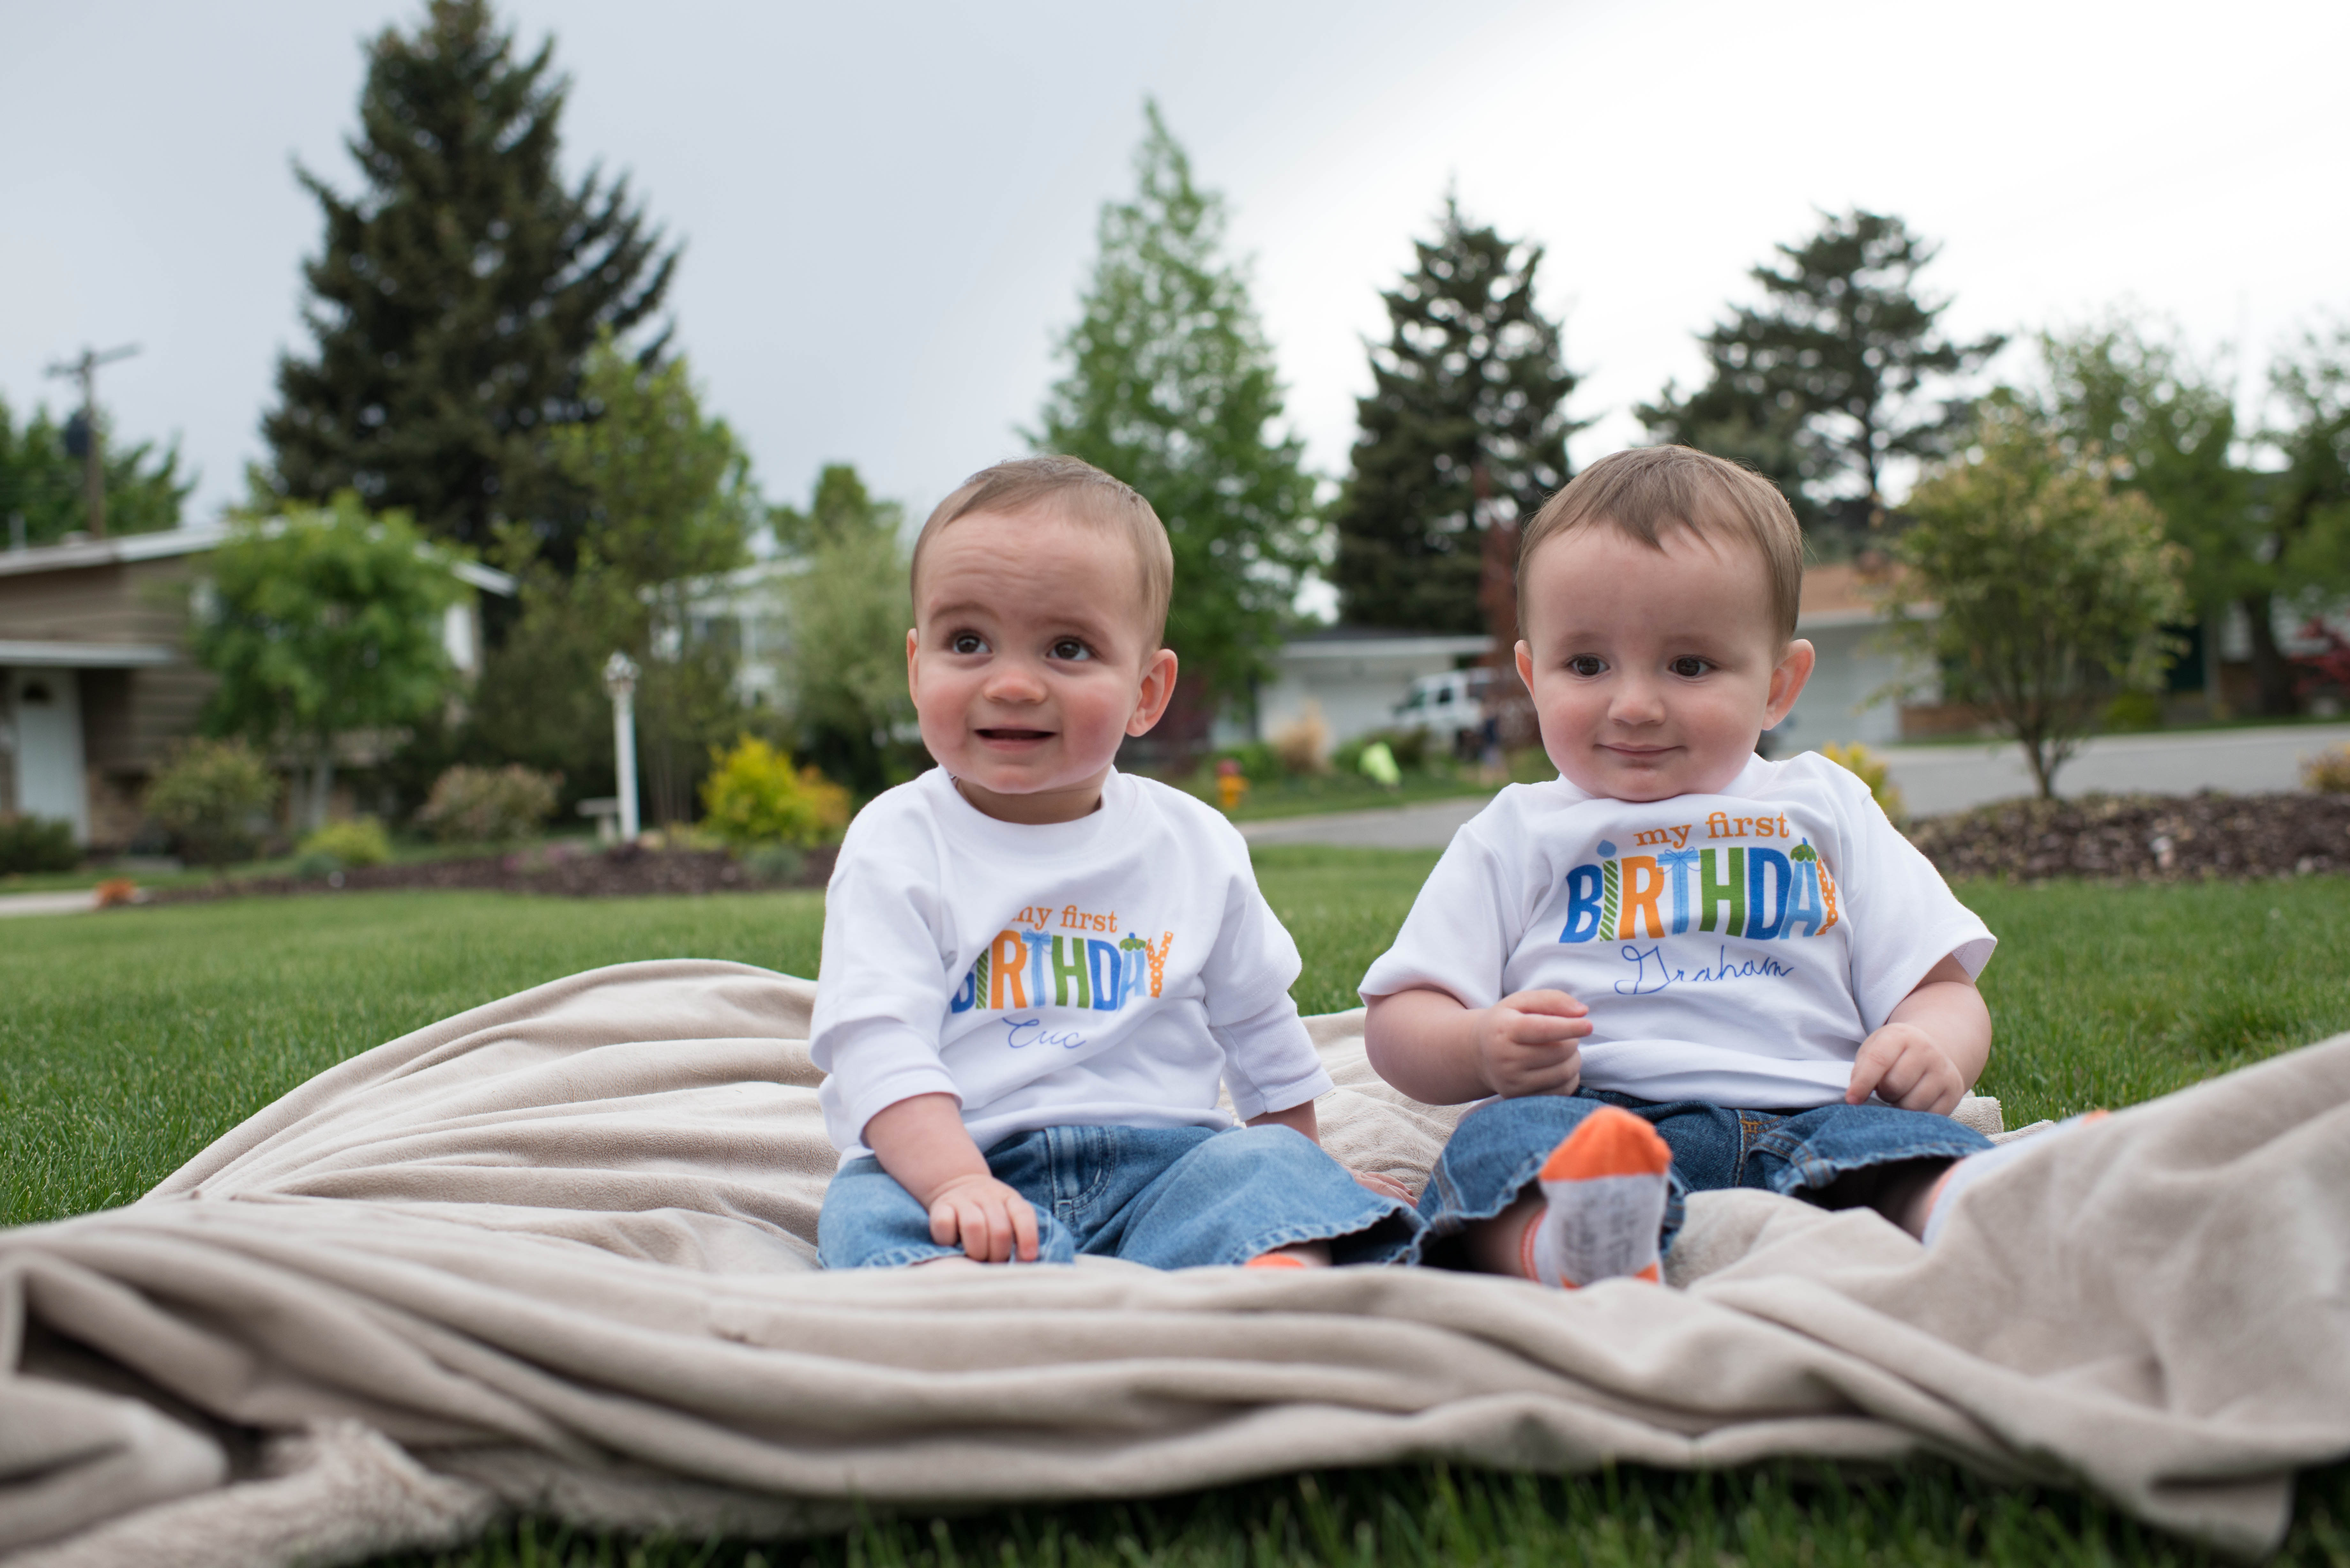 Petite Lemon in Real Life is featuring a mother of twin boys that just turned one! See what she loves about having boys at the same age, some challenges, and what Petite Lemon personalized gear she loves! 